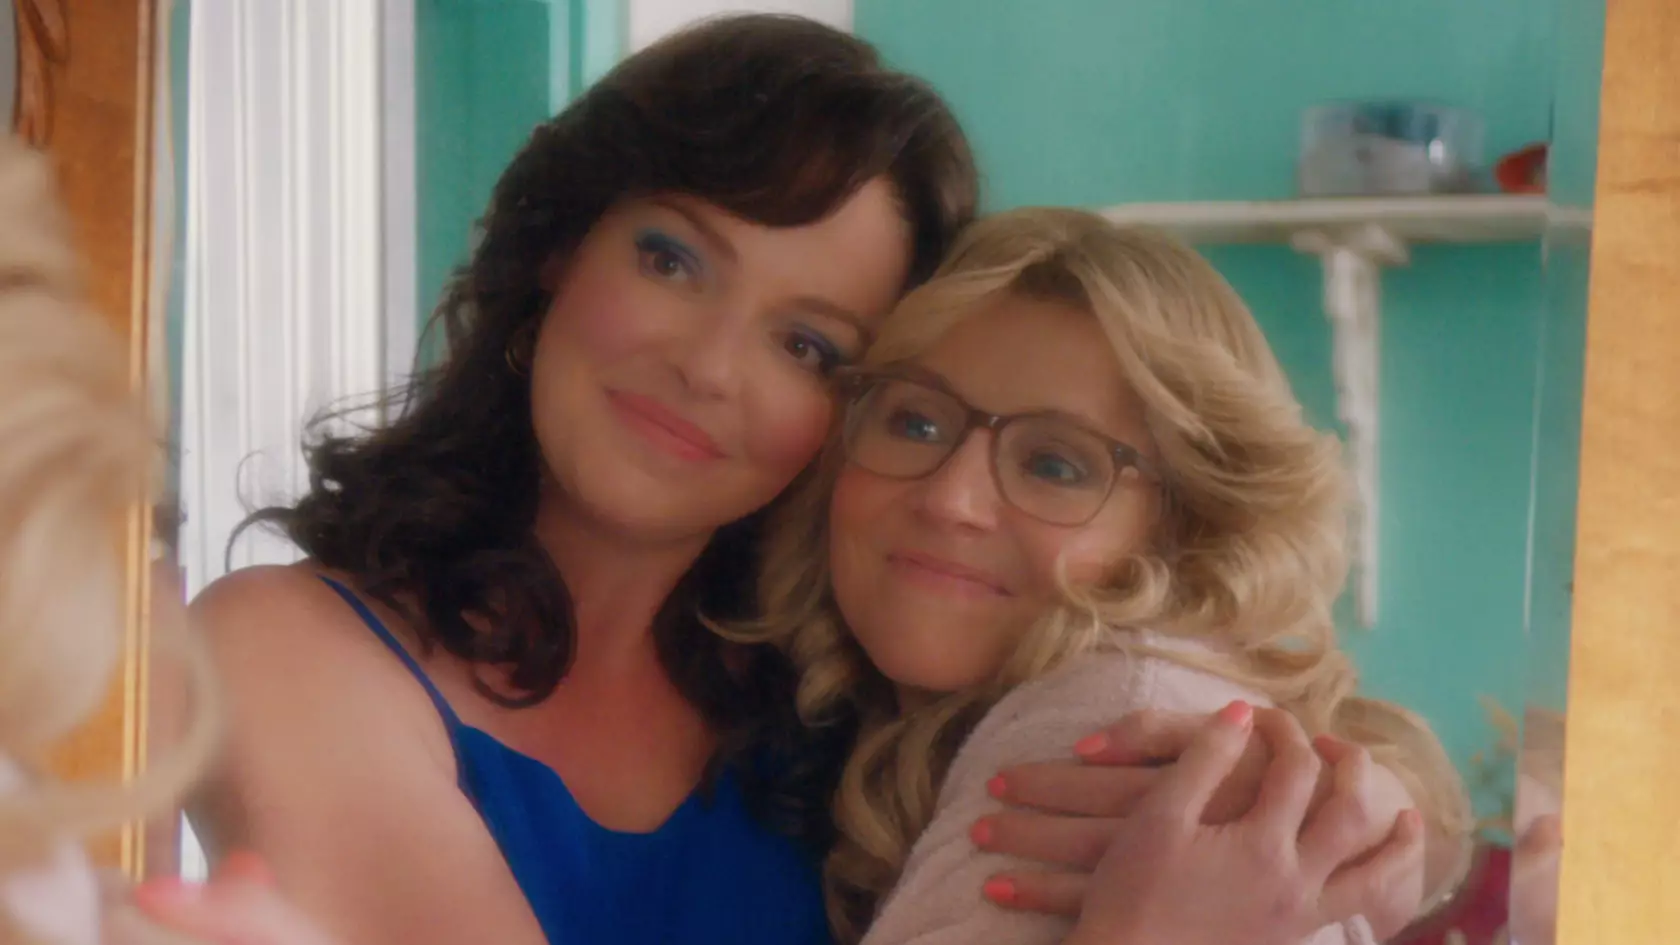 Kate and Tully, played by Katherine Heigl and Sarah Chalke (